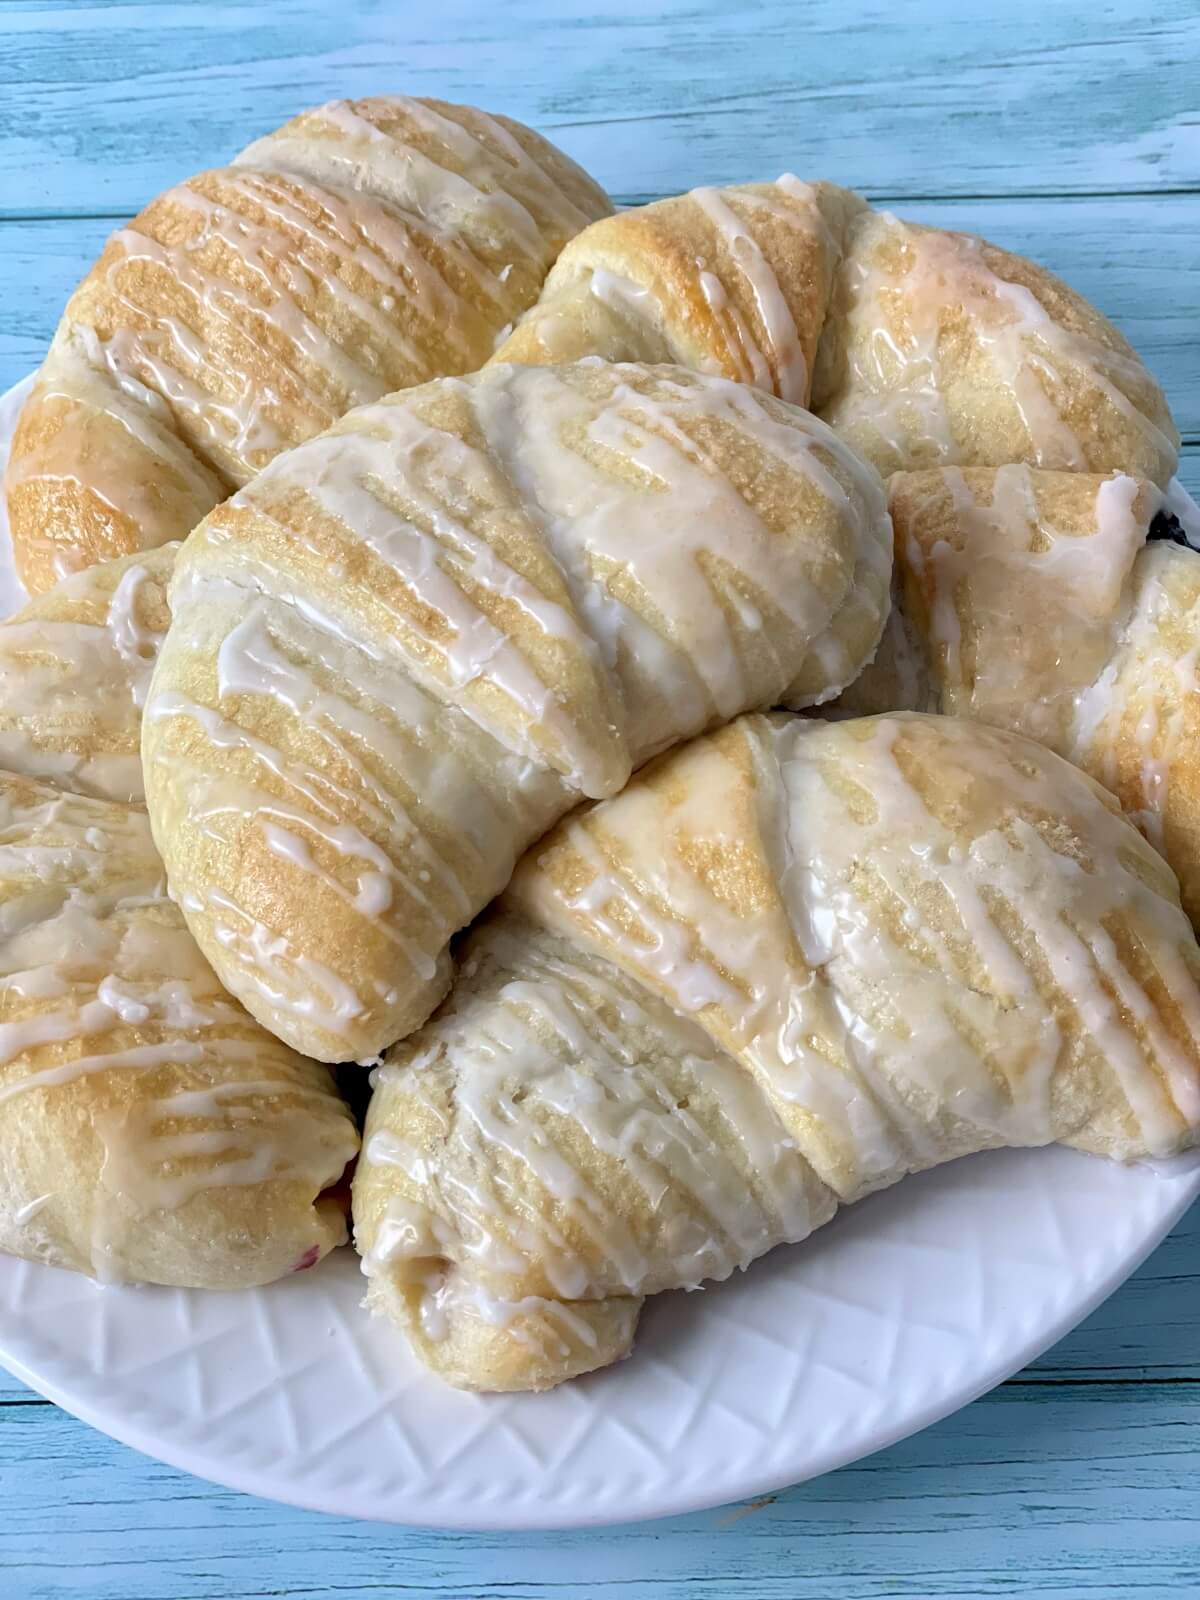 A closeup of a plate of large soft and fluffy cheese danish with glaze.